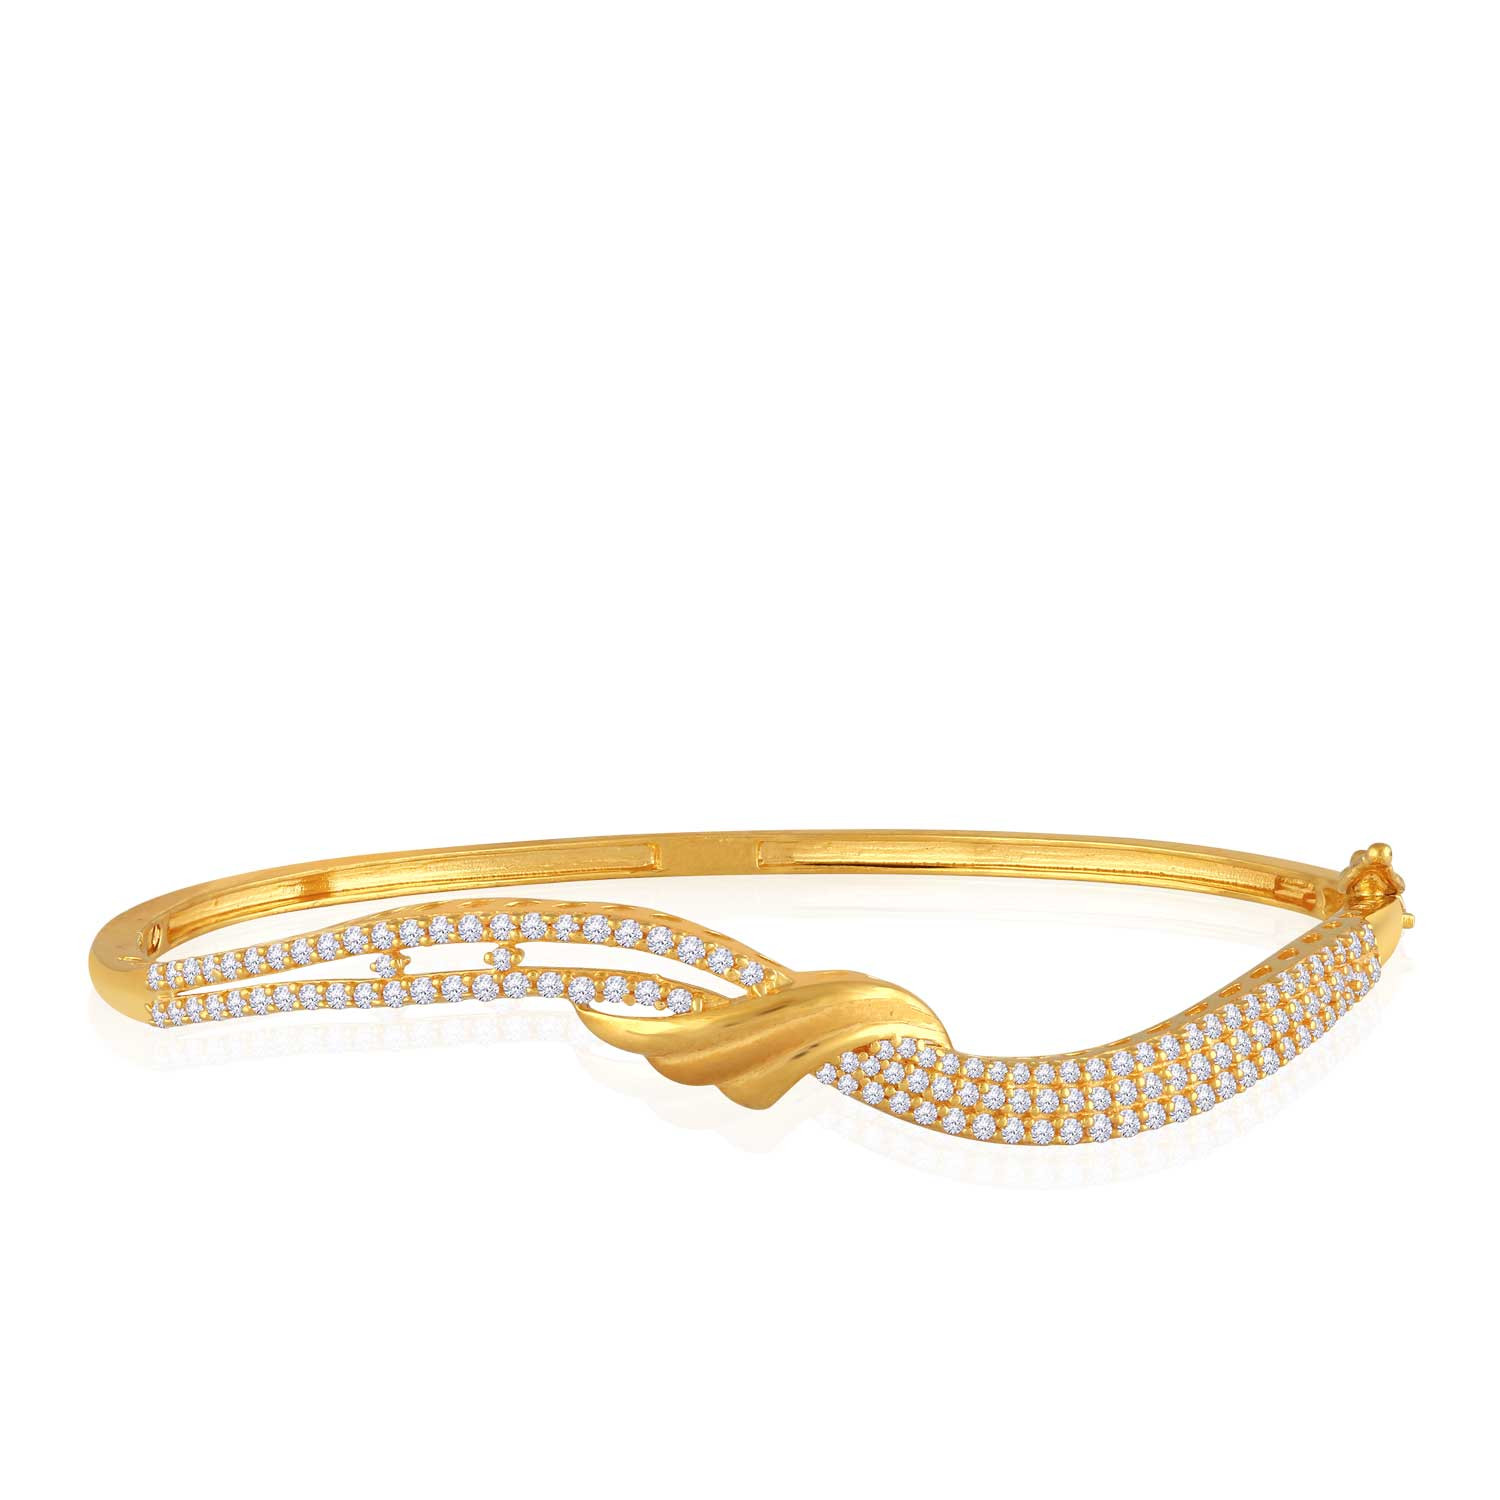 Buy MALABAR GOLD AND DIAMONDS Womens Gold Bracelet SKYBR007 | Shoppers Stop